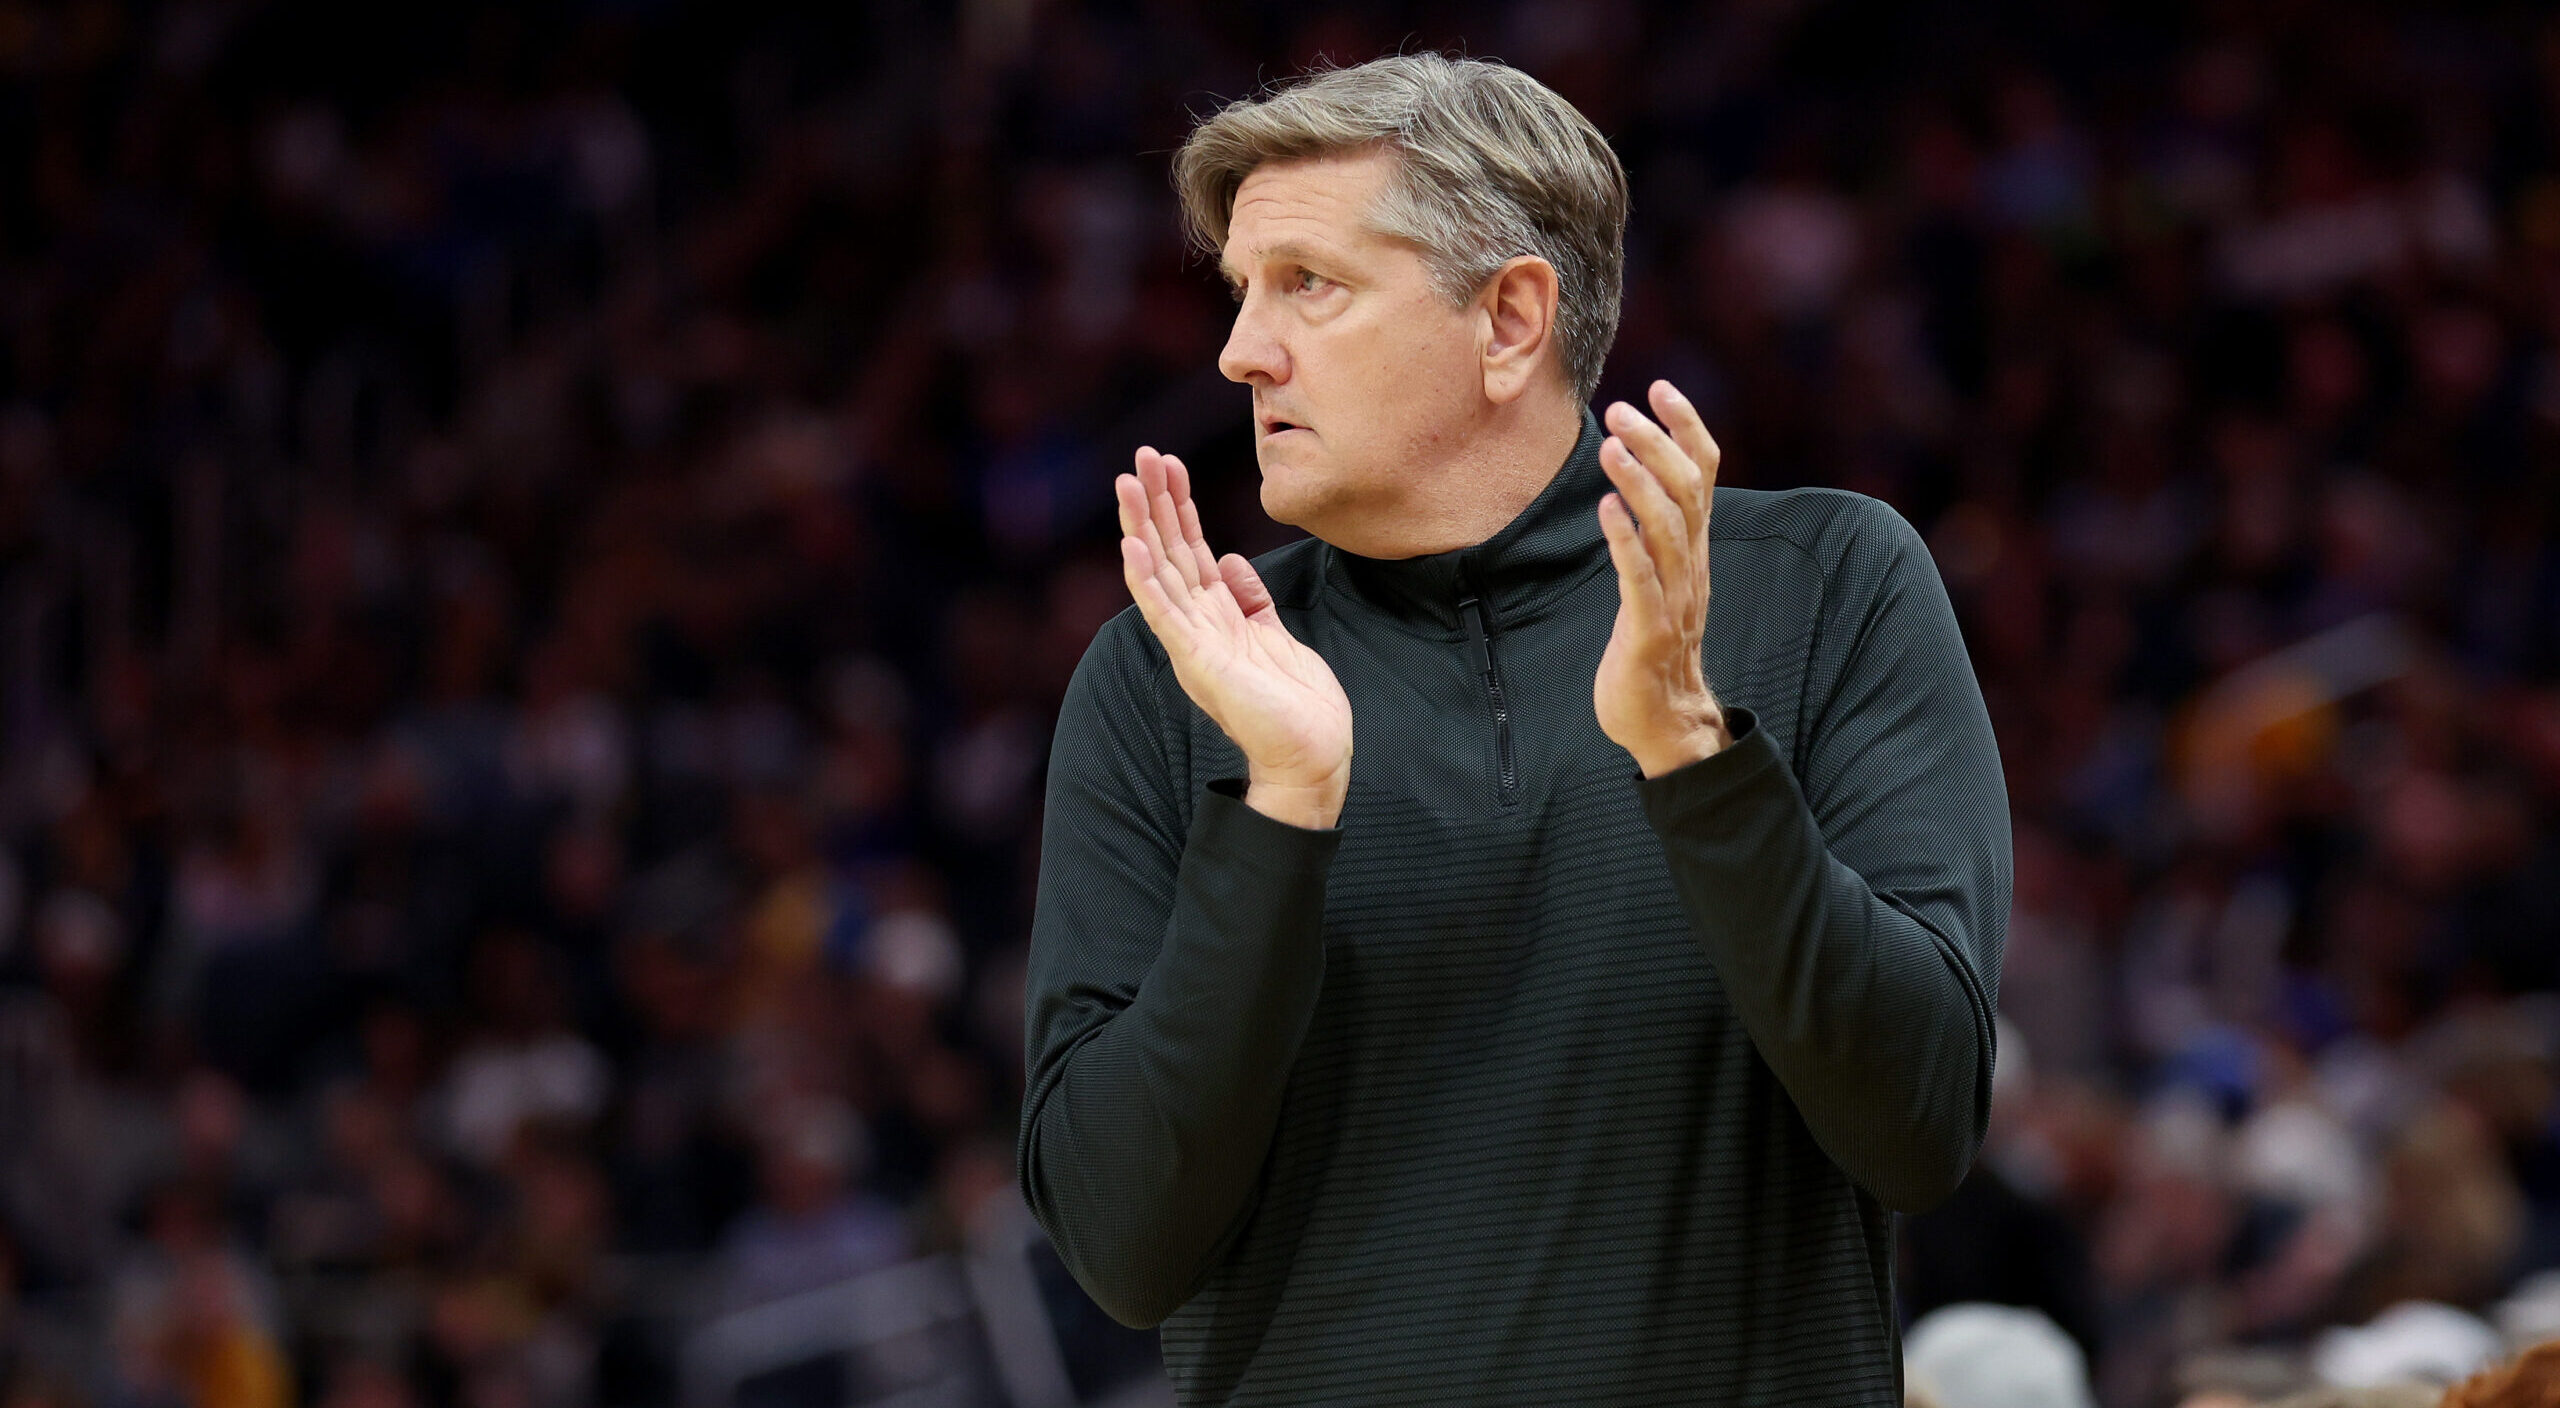 Timberwolves Head Coach Chris Finch to Sit Near Bench Despite Knee Injury for Game vs Nuggets